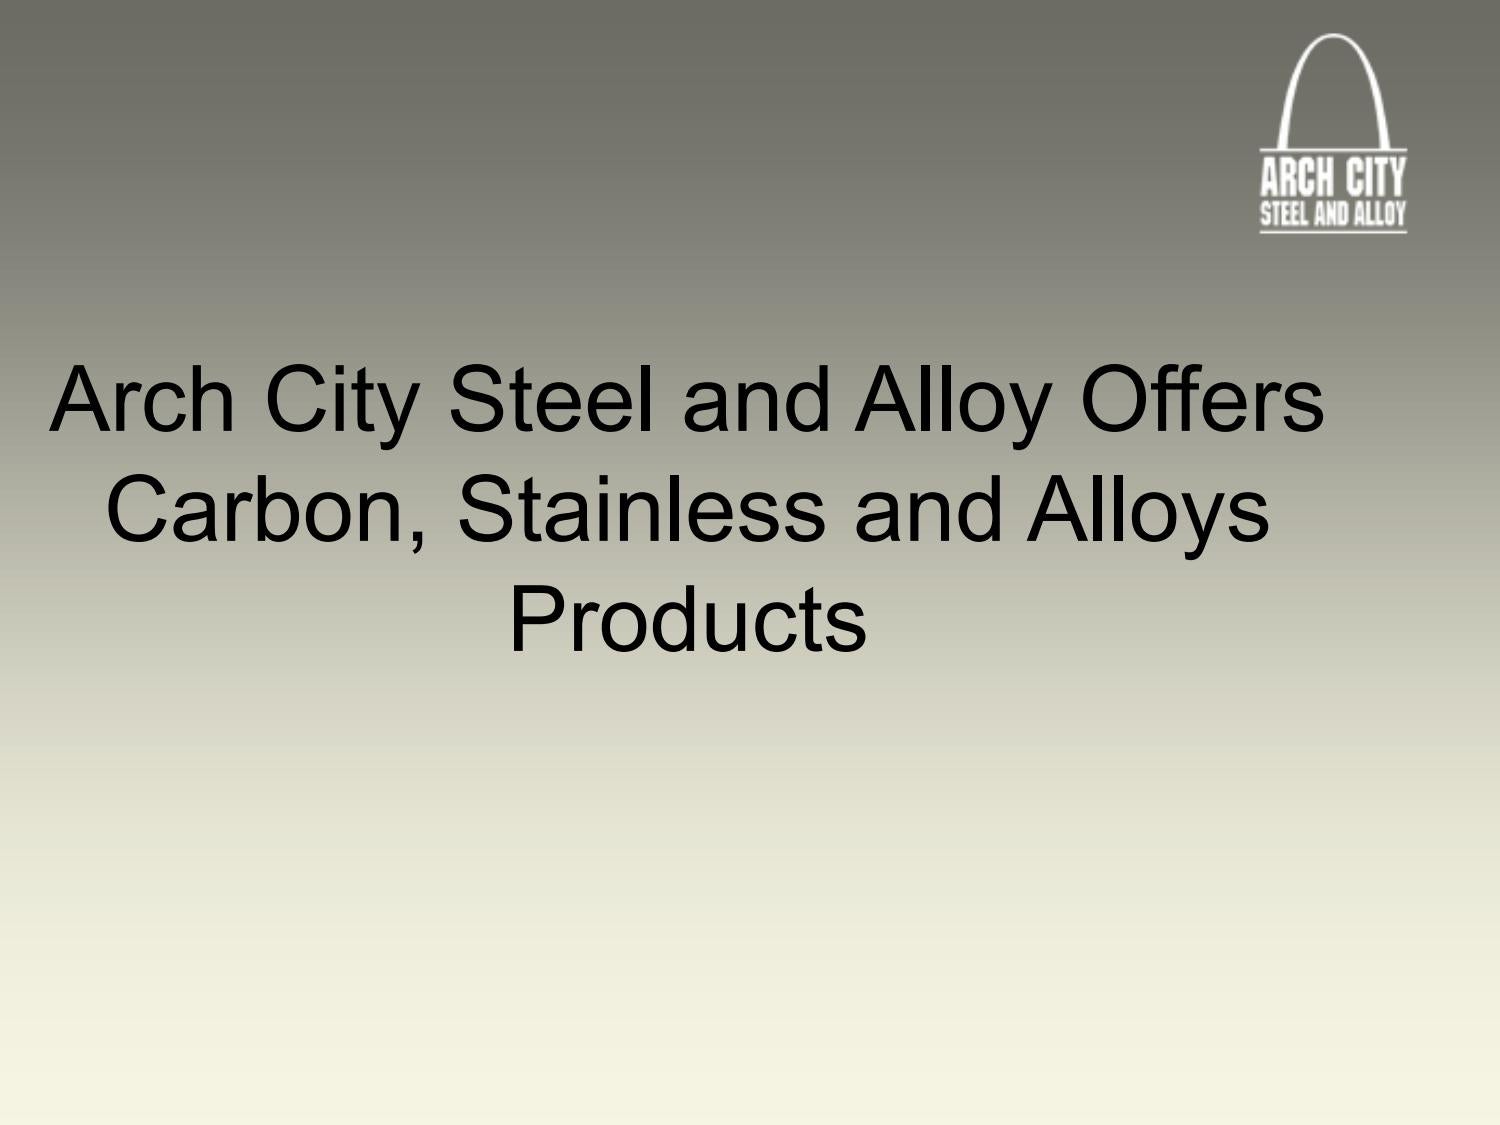 Arch City Steel & Alloy, Inc. Offers Barked Up Stainless Steel Tubes 1